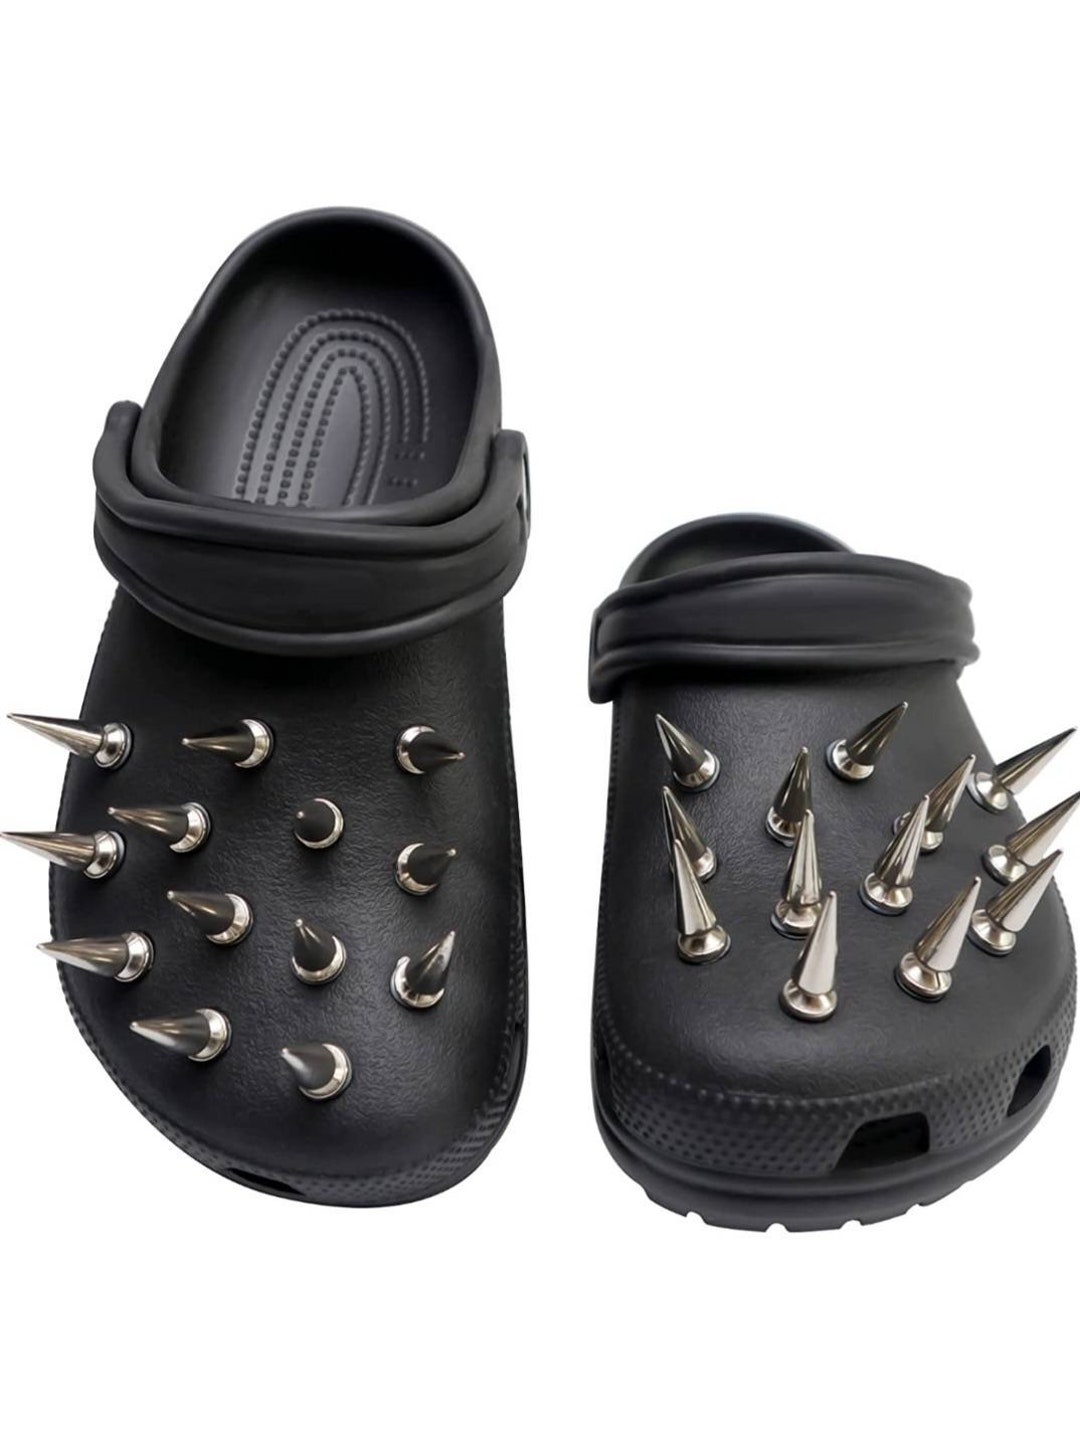 Goth Charms for Croc Women Girls,Shoe Chains,Metal Spikes Punk Rivets  silver